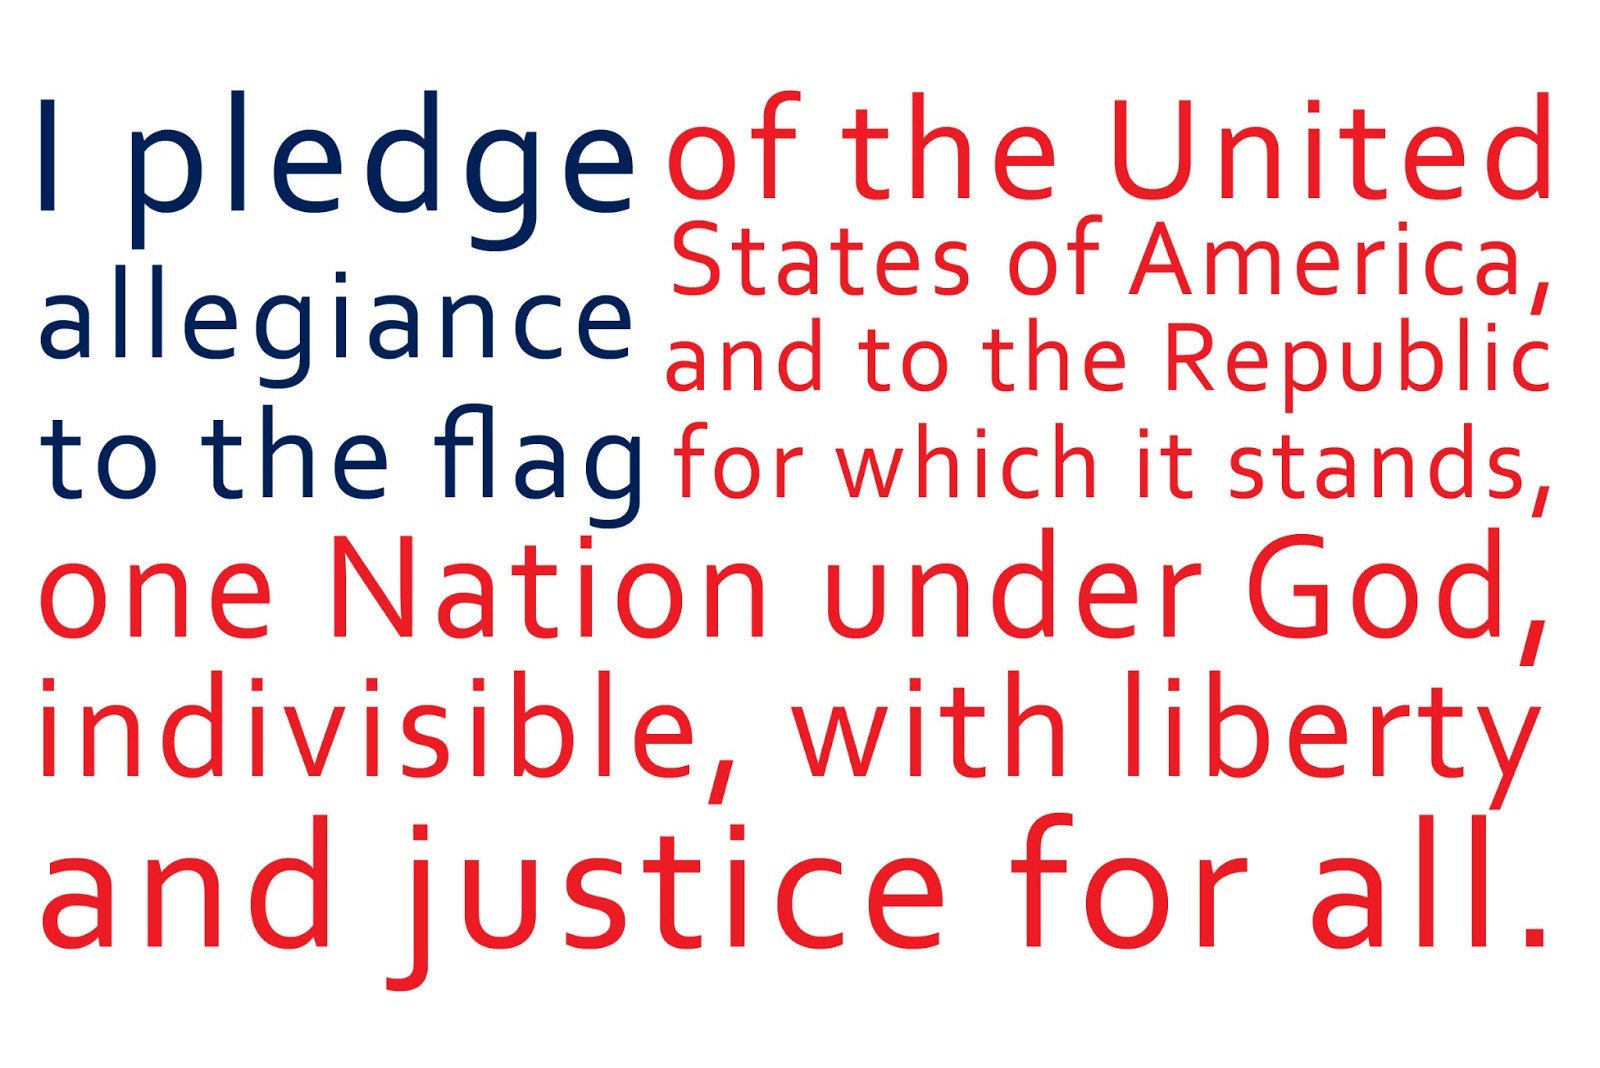 The Pledge of Allegiance! www.mytributejournal.com